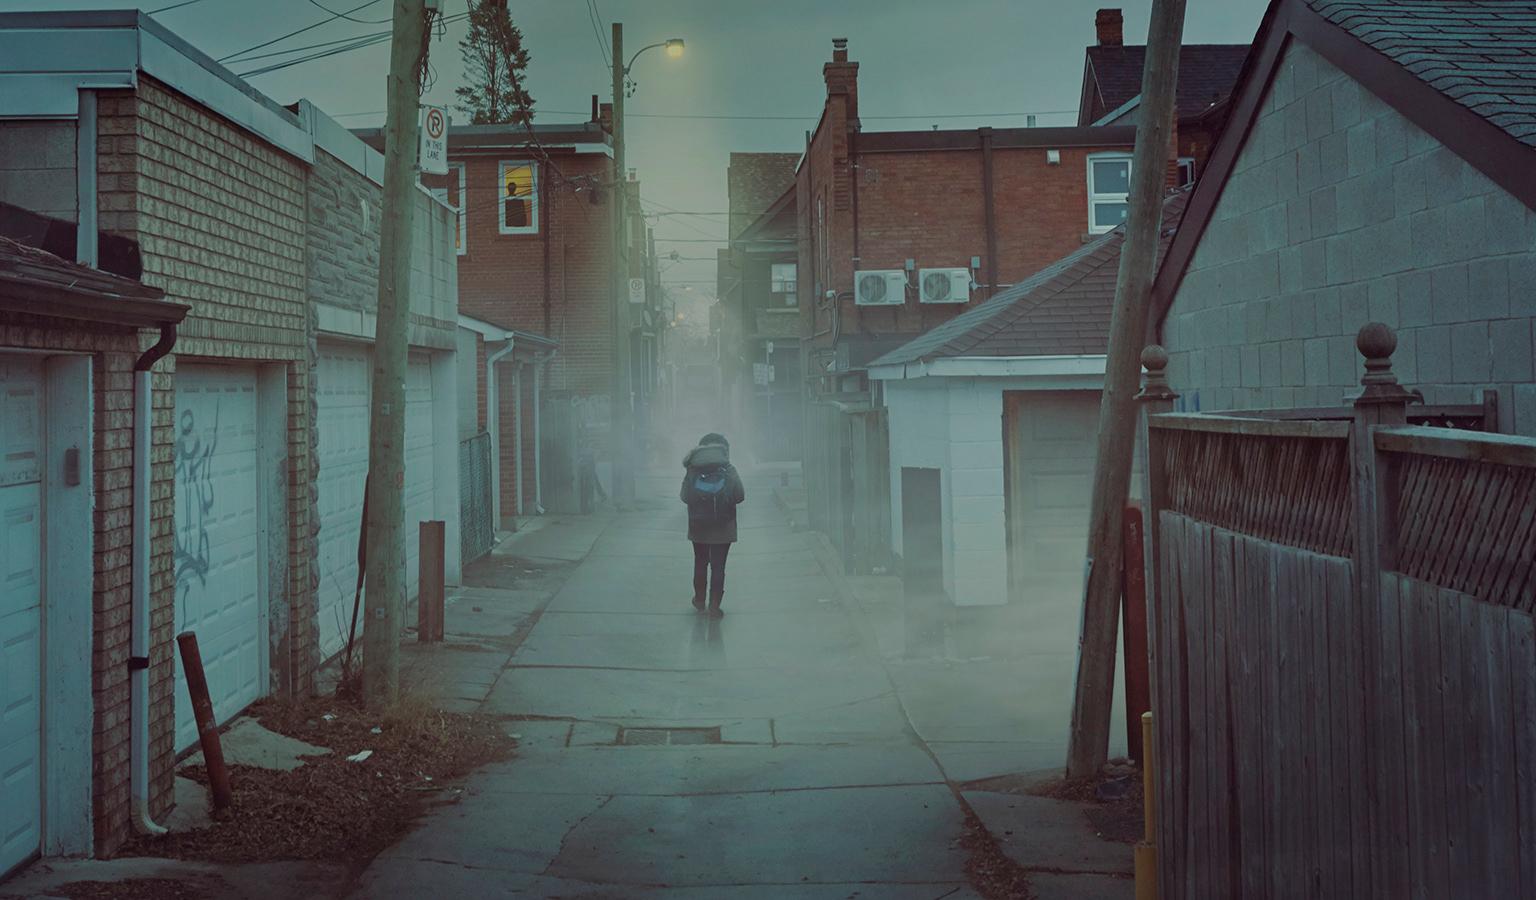 Alley Walker - Photograph by Tyler Gray